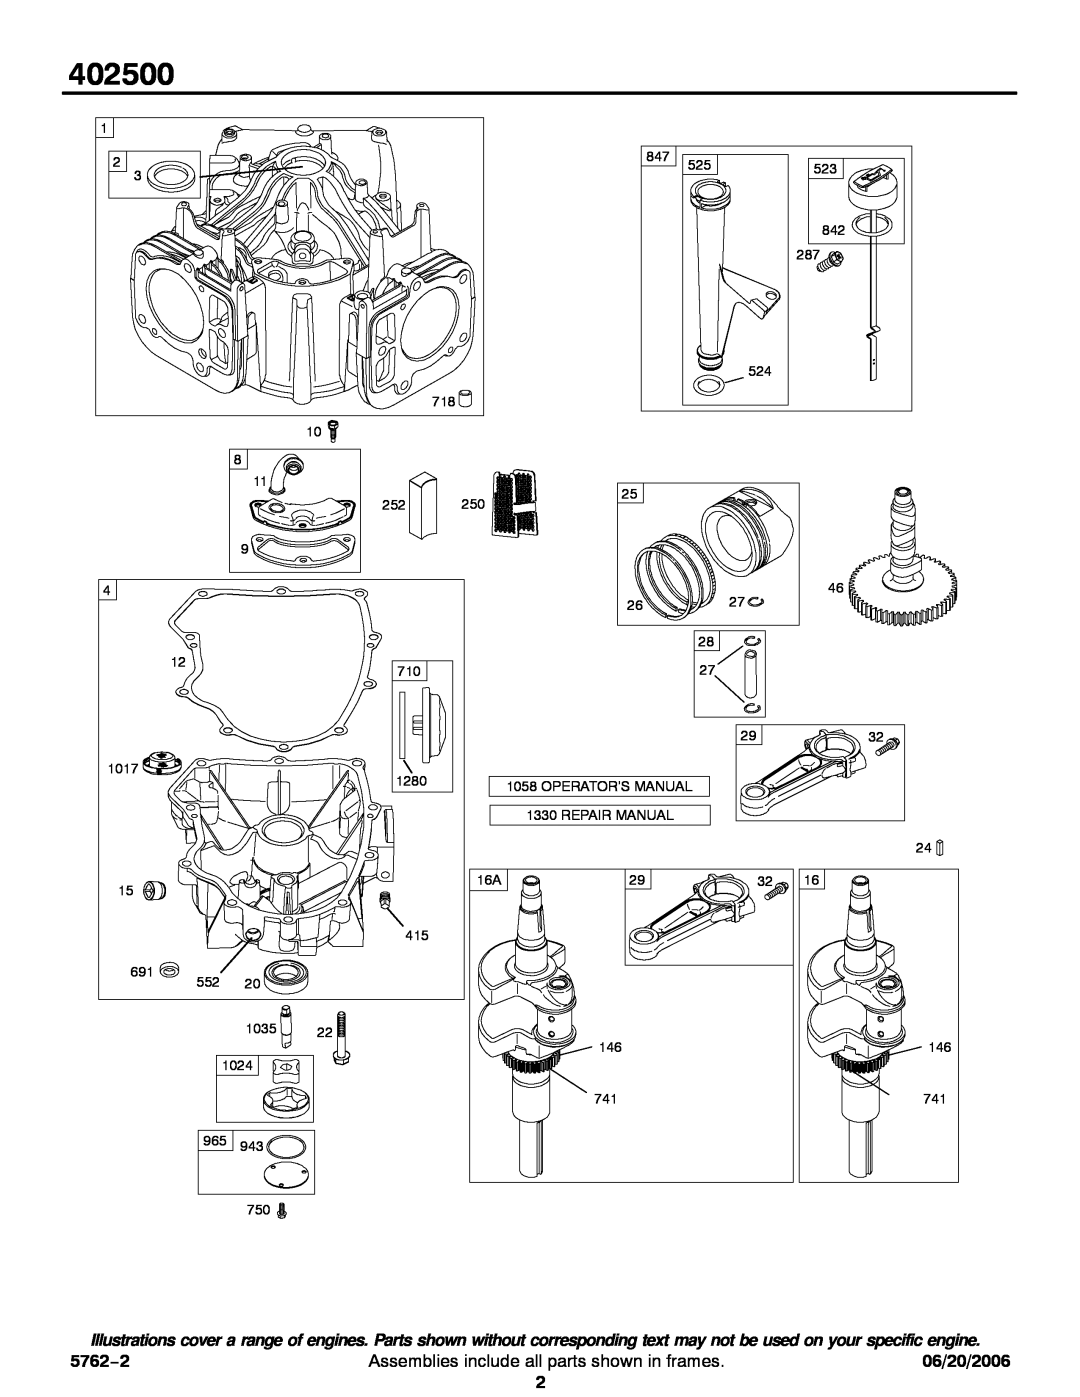 Briggs & Stratton 402500 service manual 5762−2, Assemblies include all parts shown in frames, 06/20/2006 